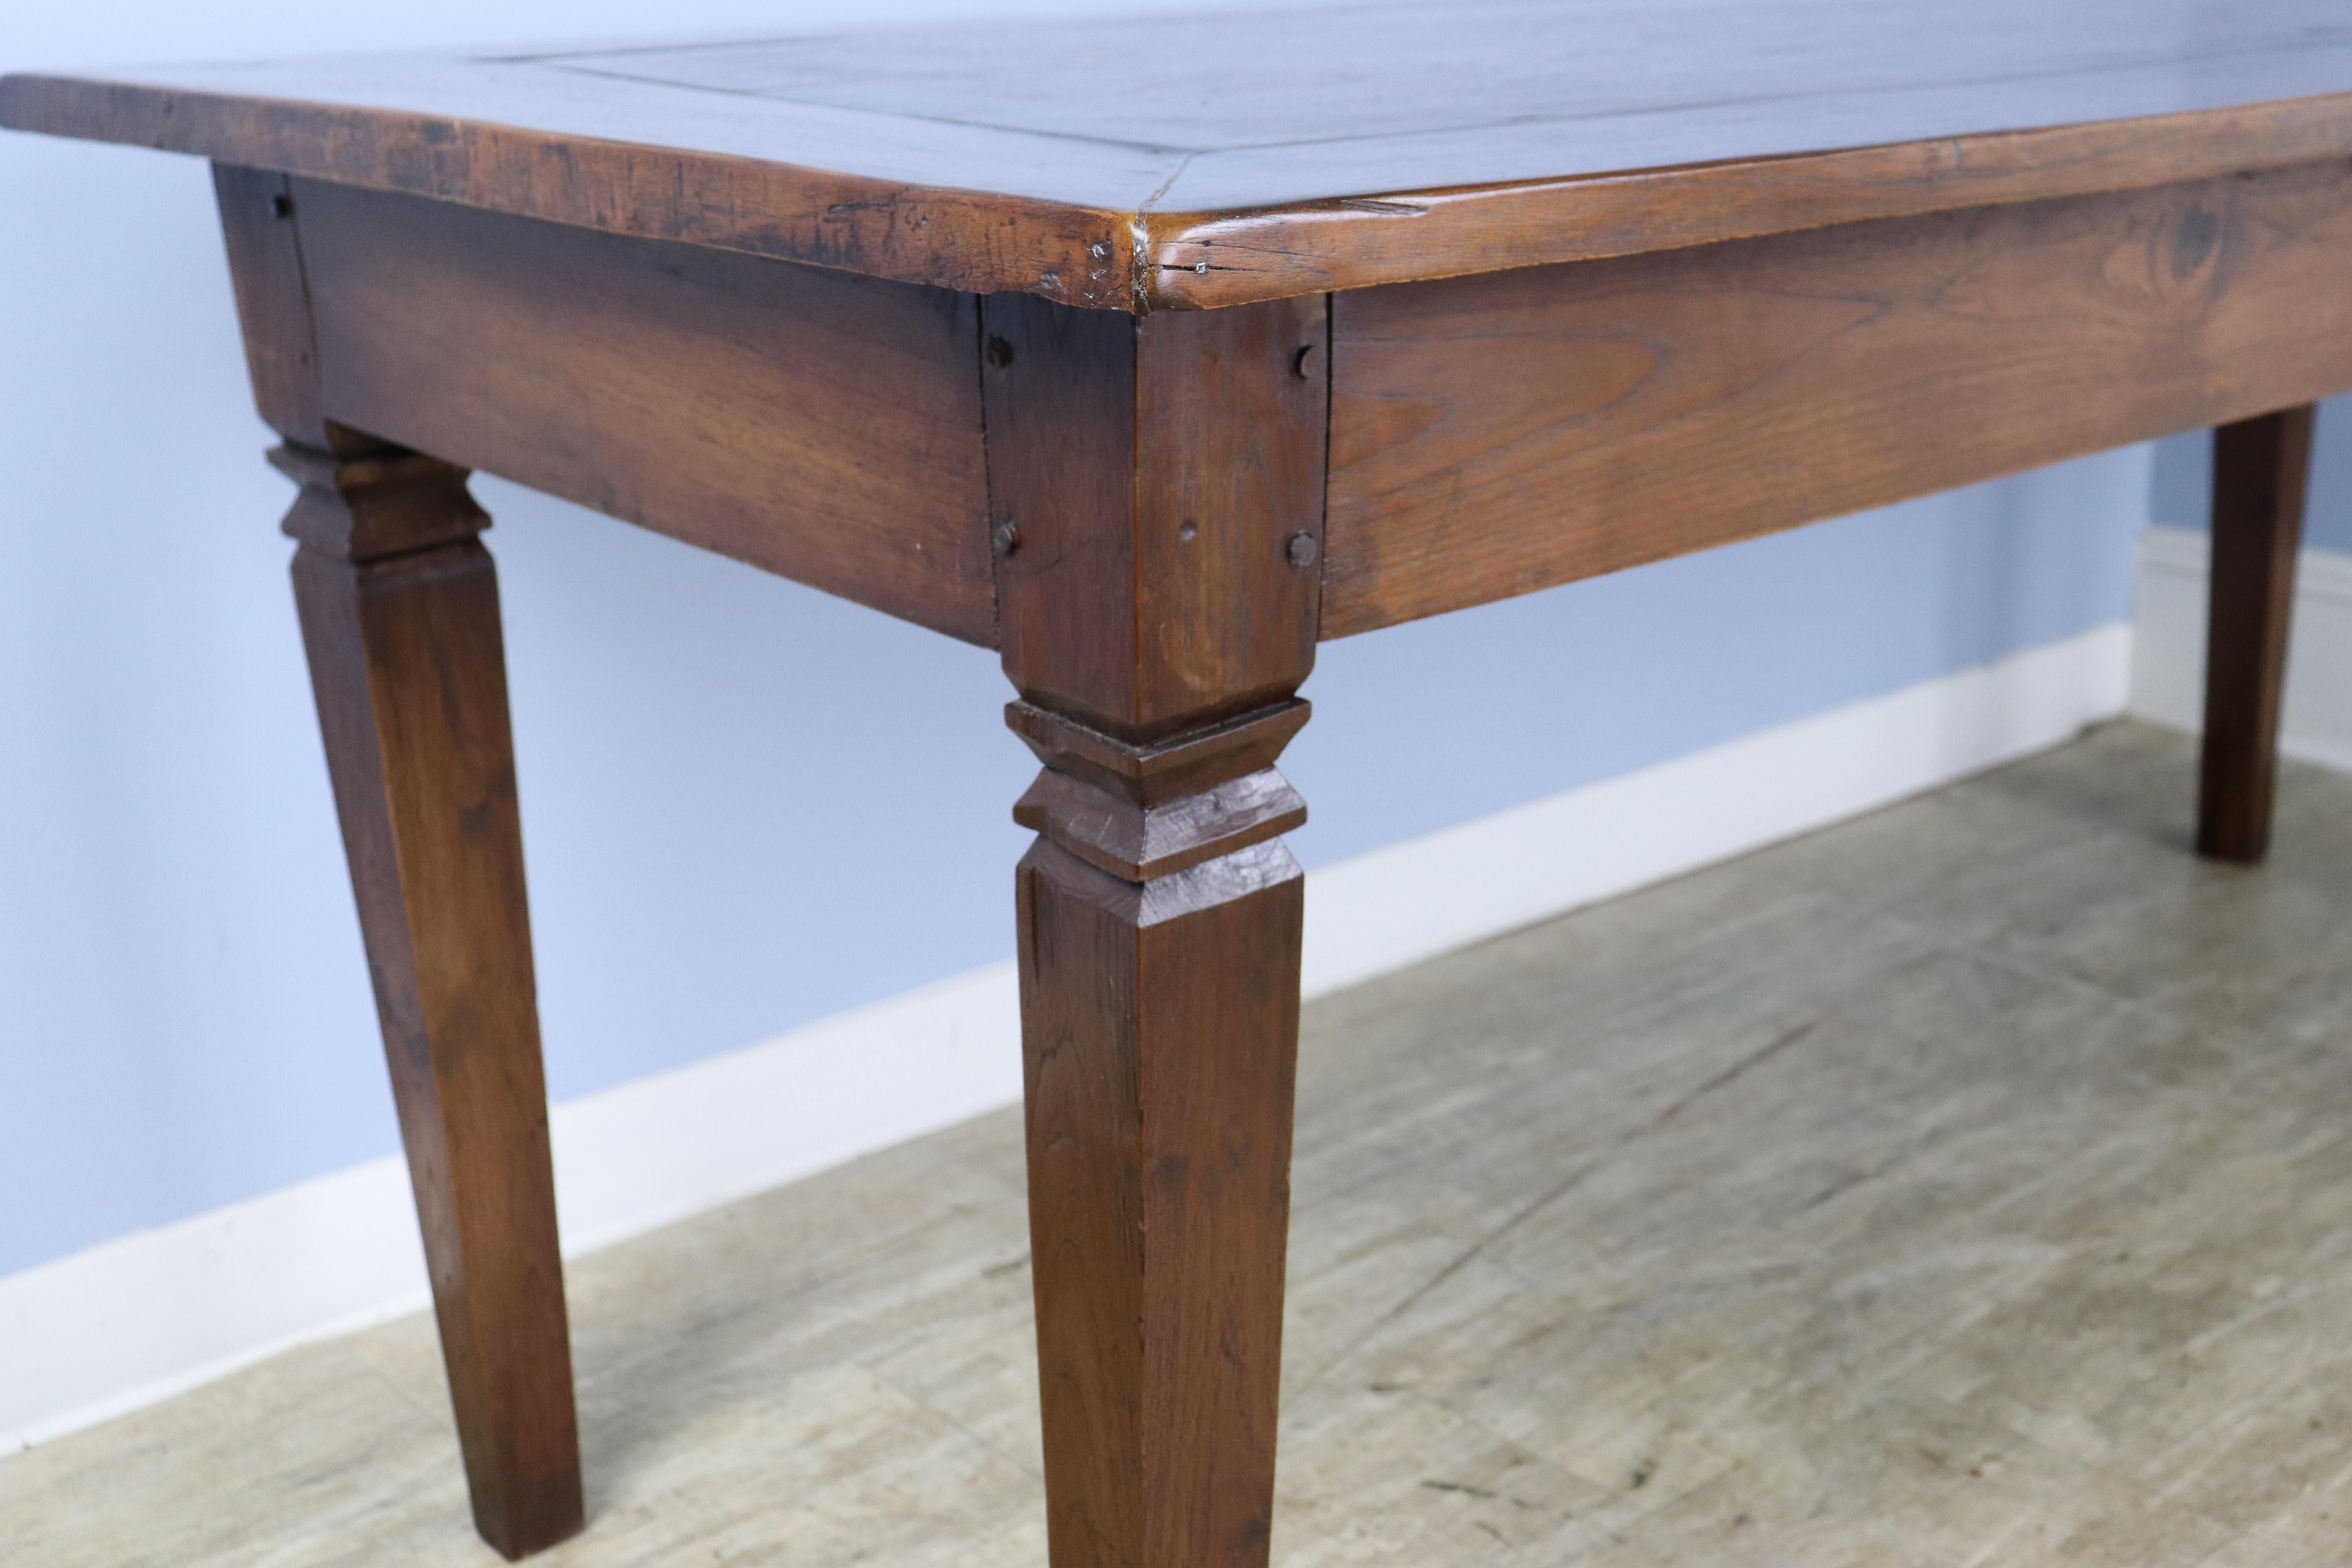 Antique Cherry Farm Table, Carved Legs and Mitred Corners In Good Condition For Sale In Port Chester, NY